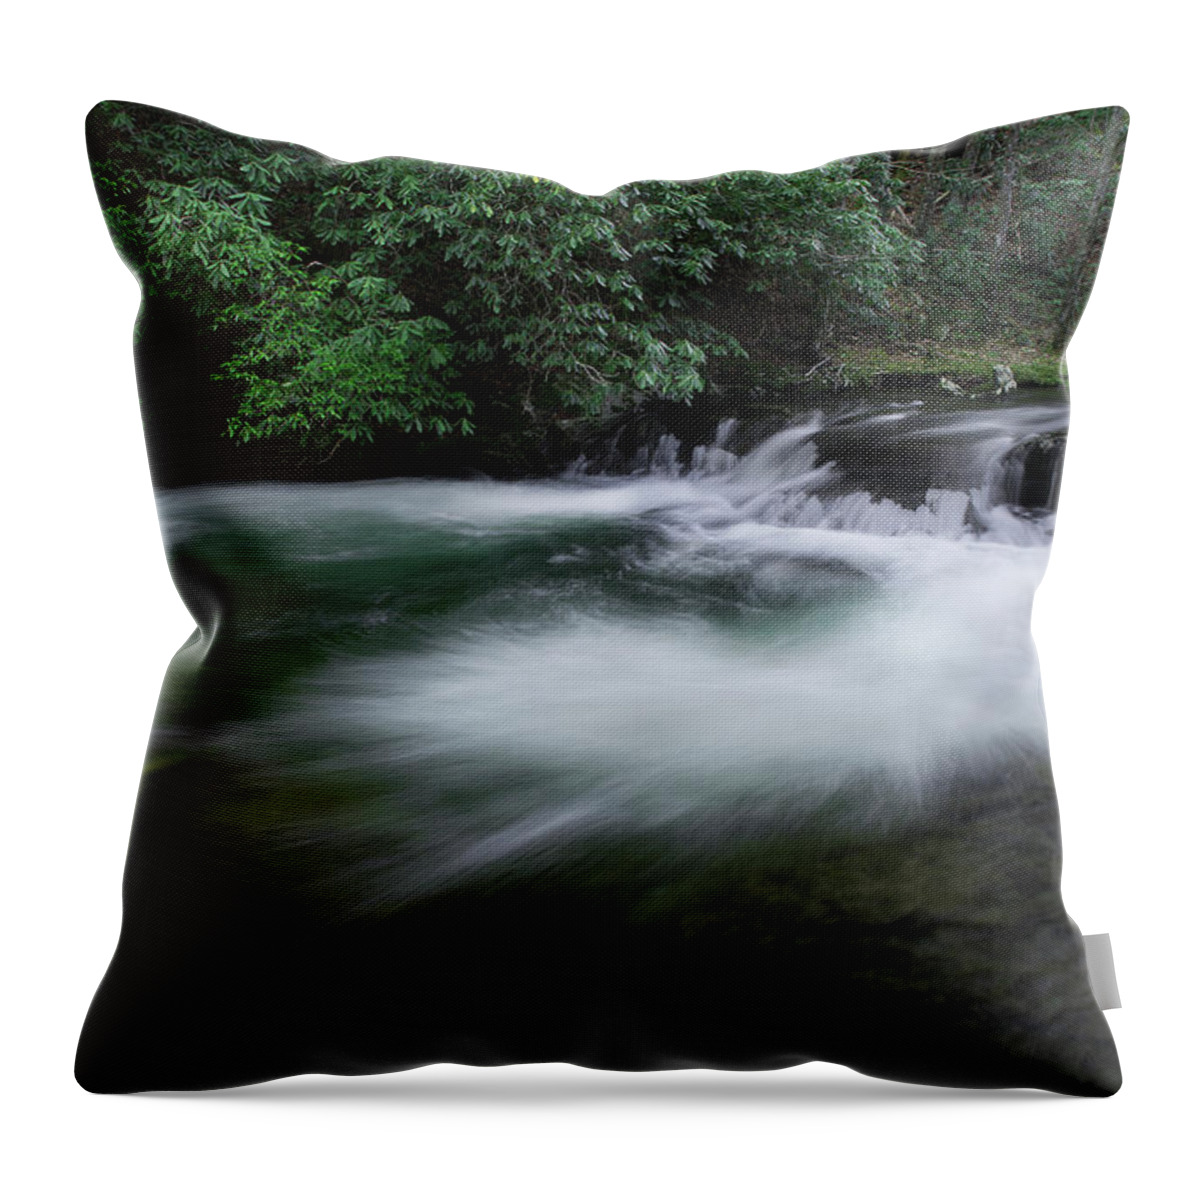 Stream Throw Pillow featuring the photograph Spring River by Mike Eingle